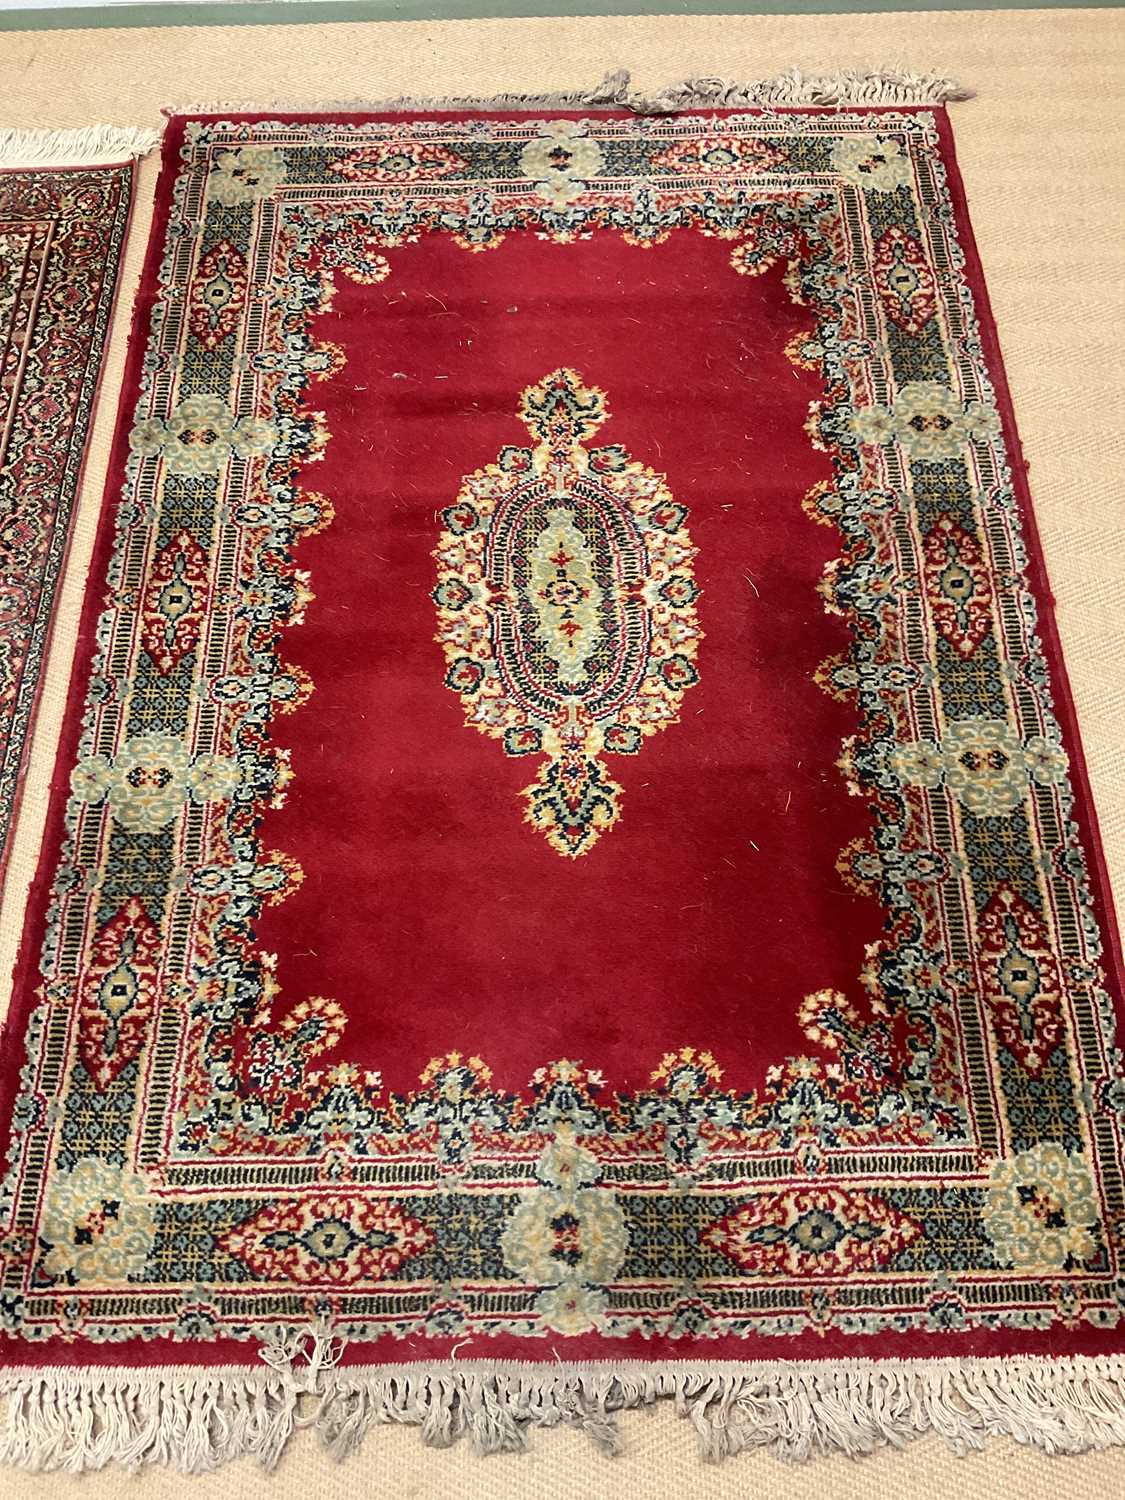 Two vintage Eastern rugs, one a dark red rug with central medallion and decorative border, 122 x - Bild 3 aus 6